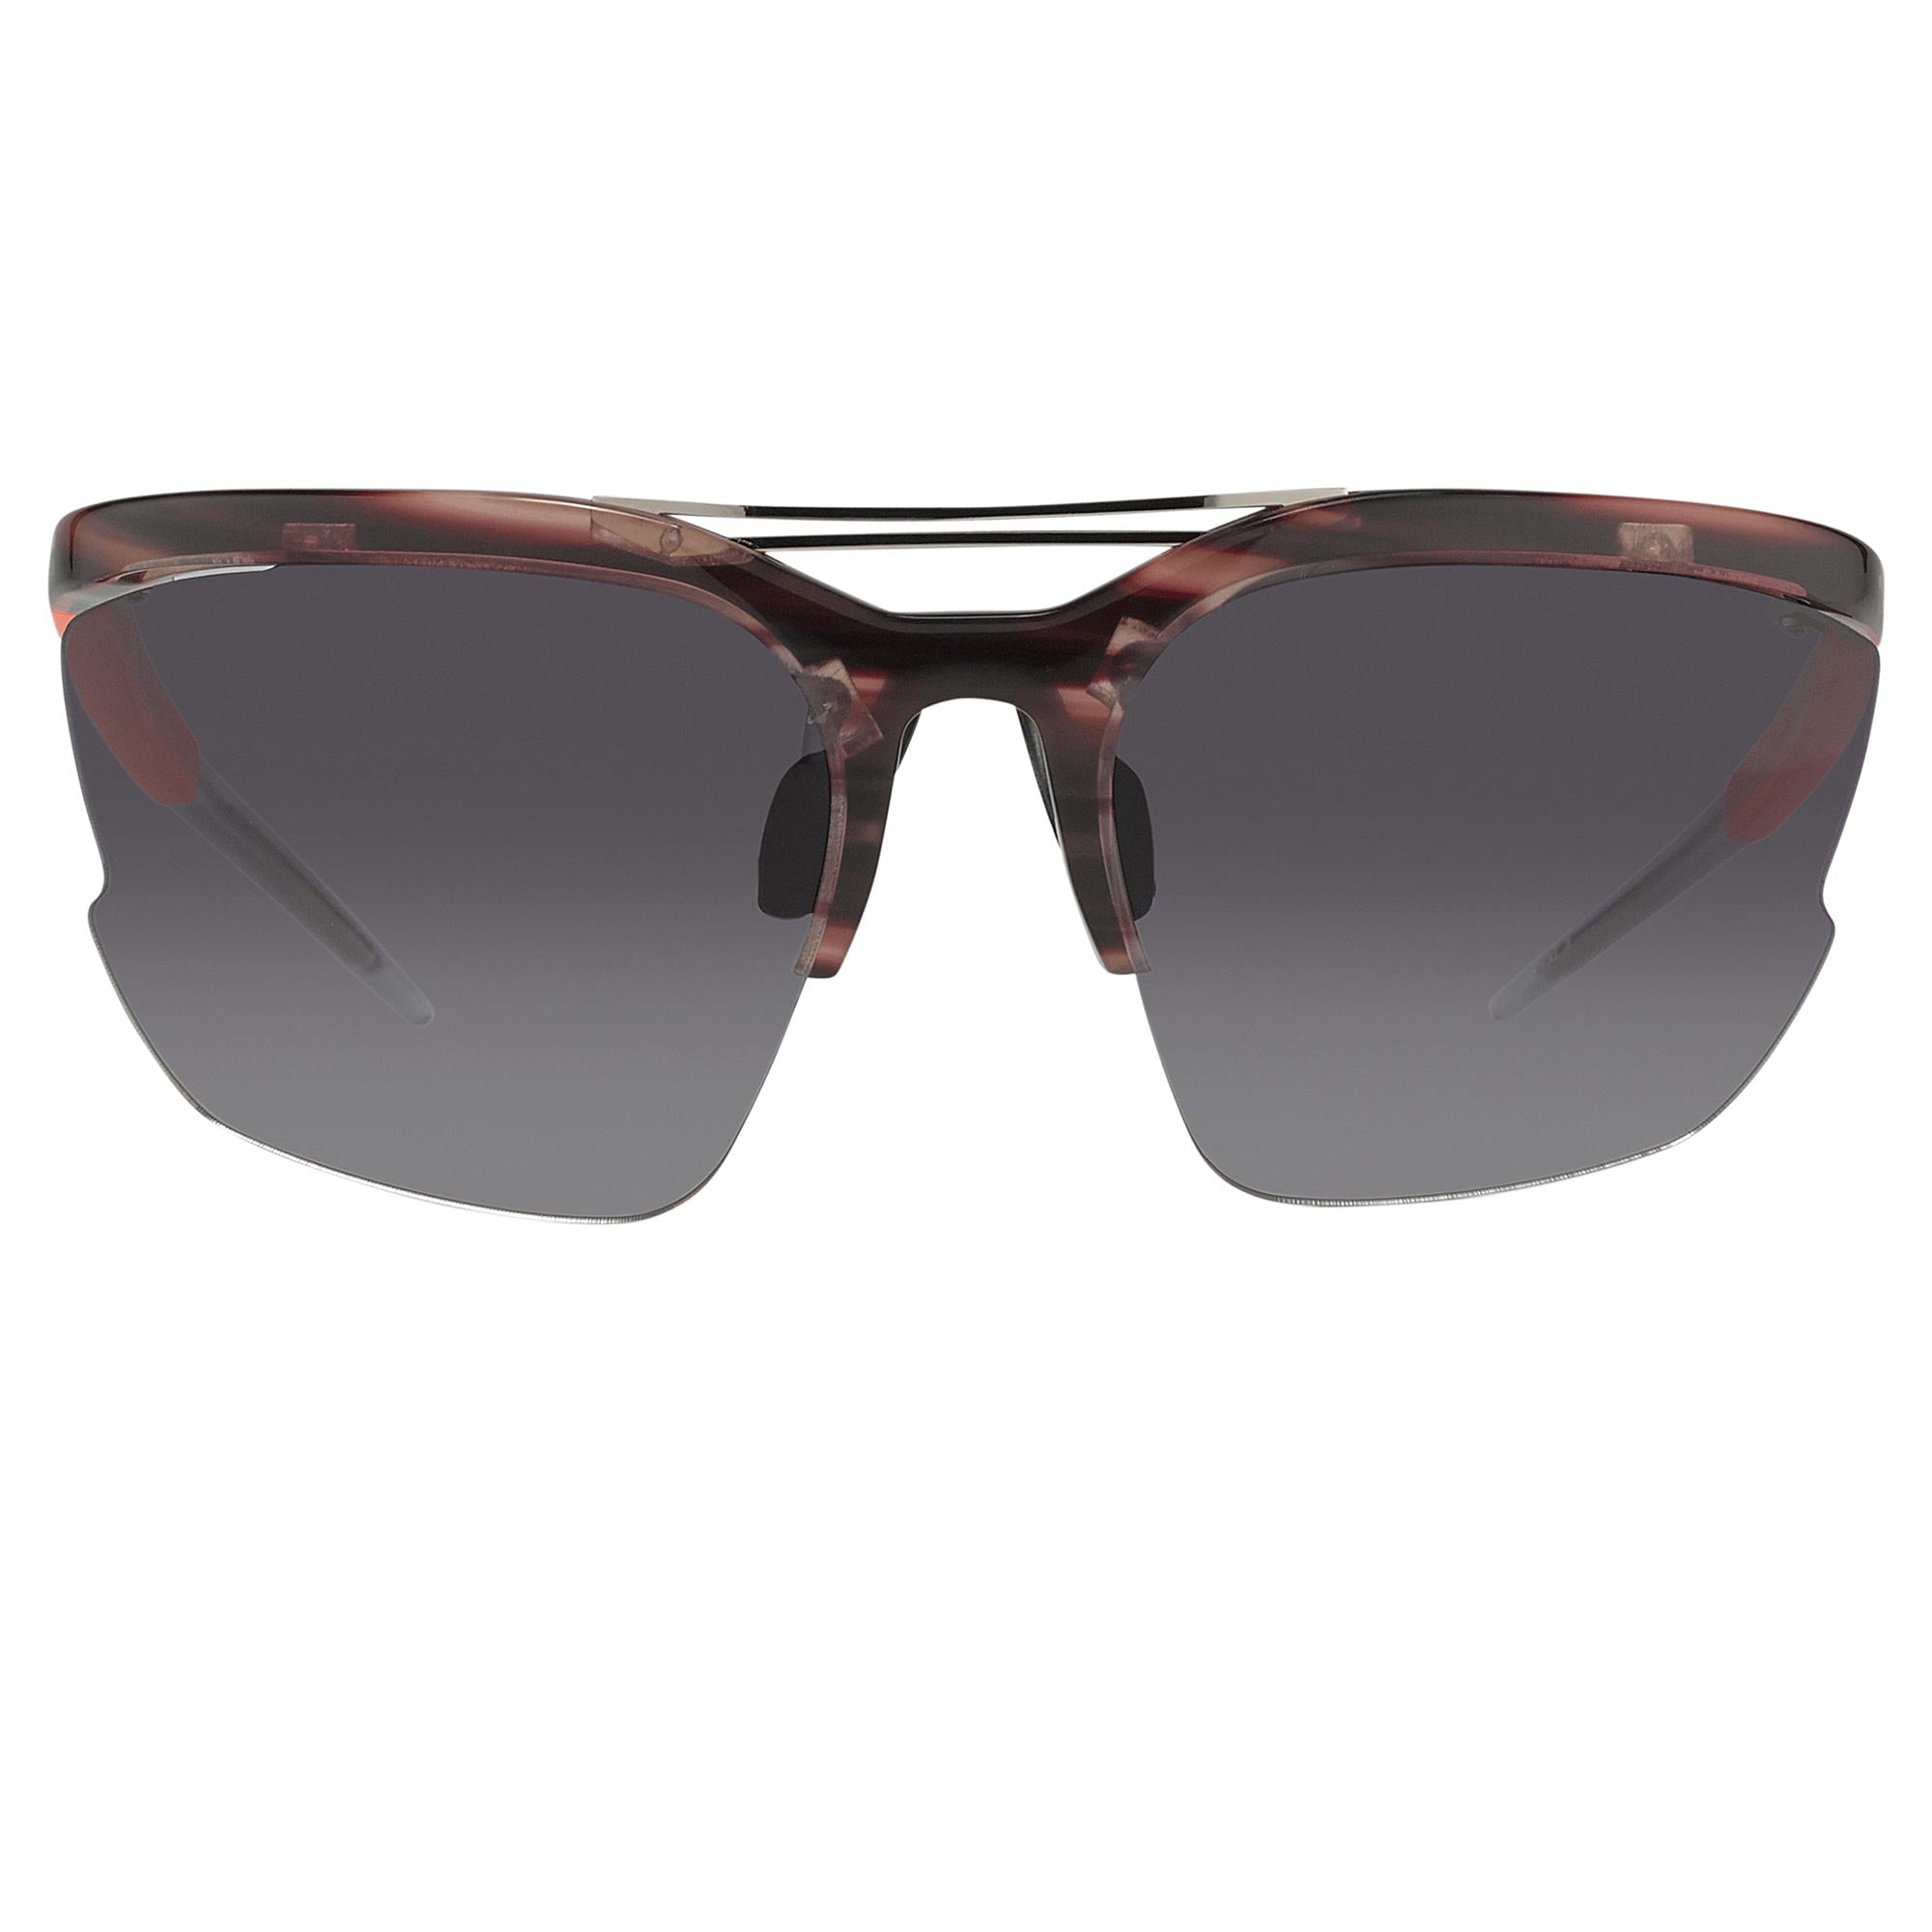 Prabal Gurung Sunglasses Female Special Frame Purple Horn Category 3 Black Lenses PG21C2SUN - Watches & Crystals